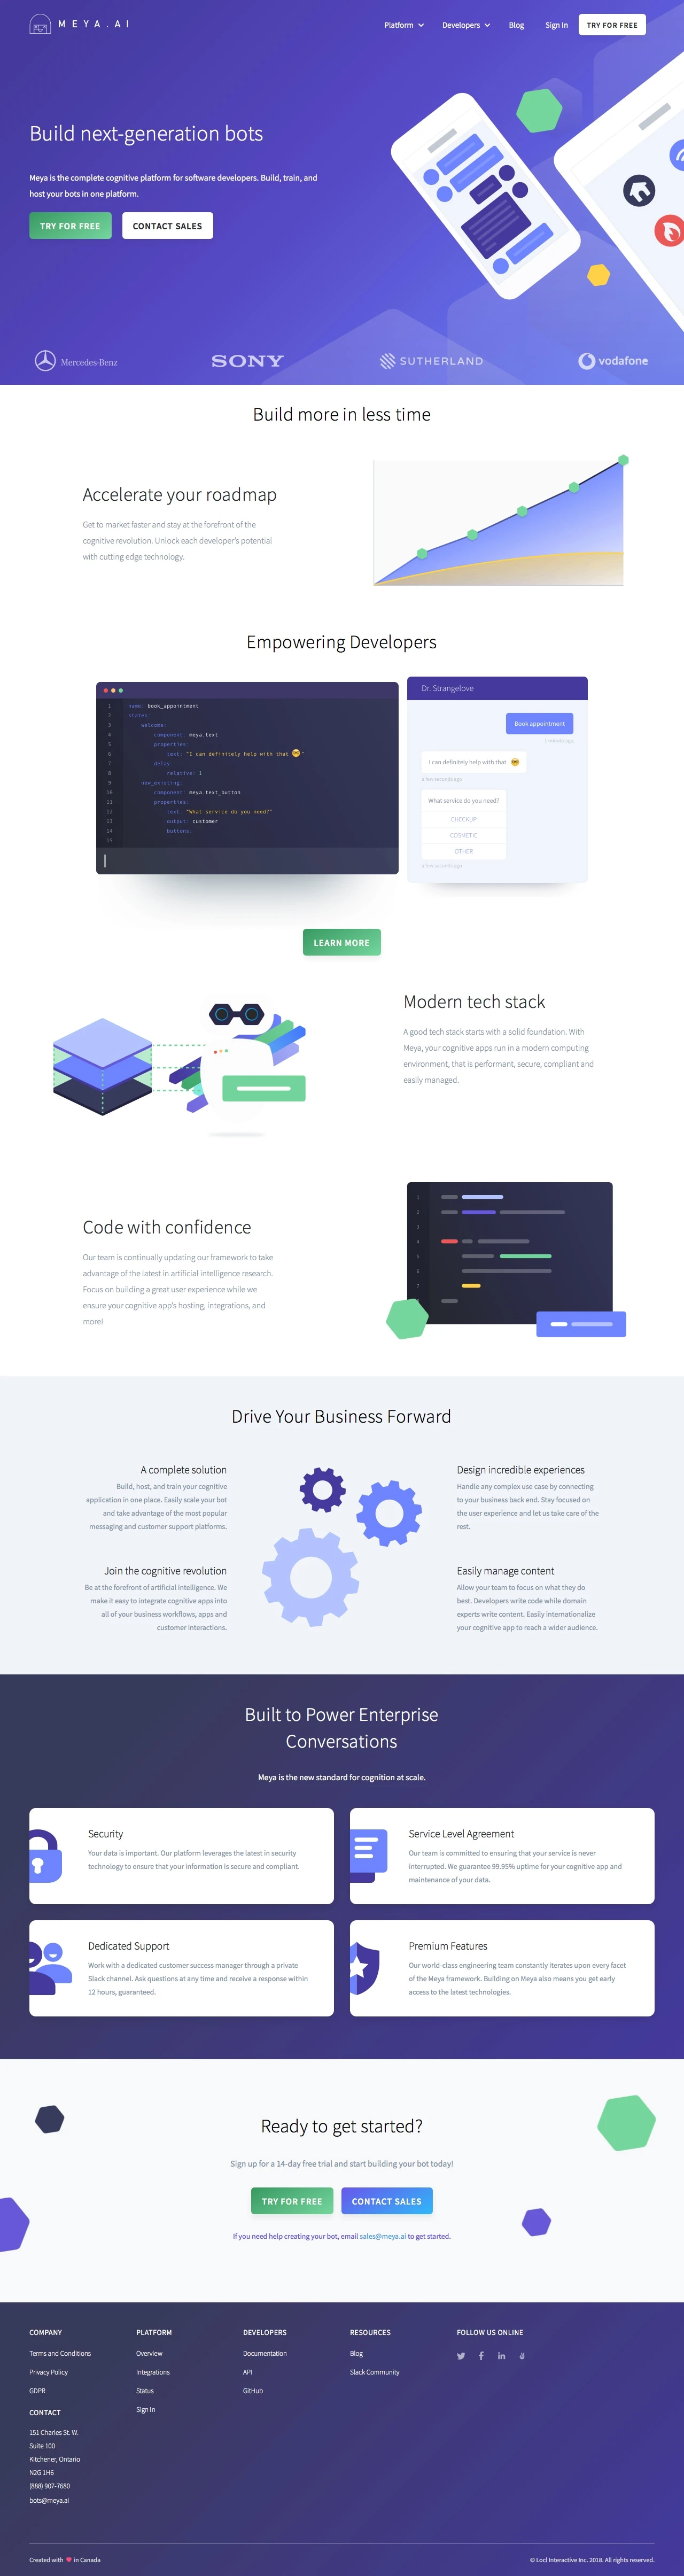 Meya.ai Landing Page Example: Meya.ai is the complete cognitive platform for software developers. From bots to intelligent assistants, deliver something your customers will love.